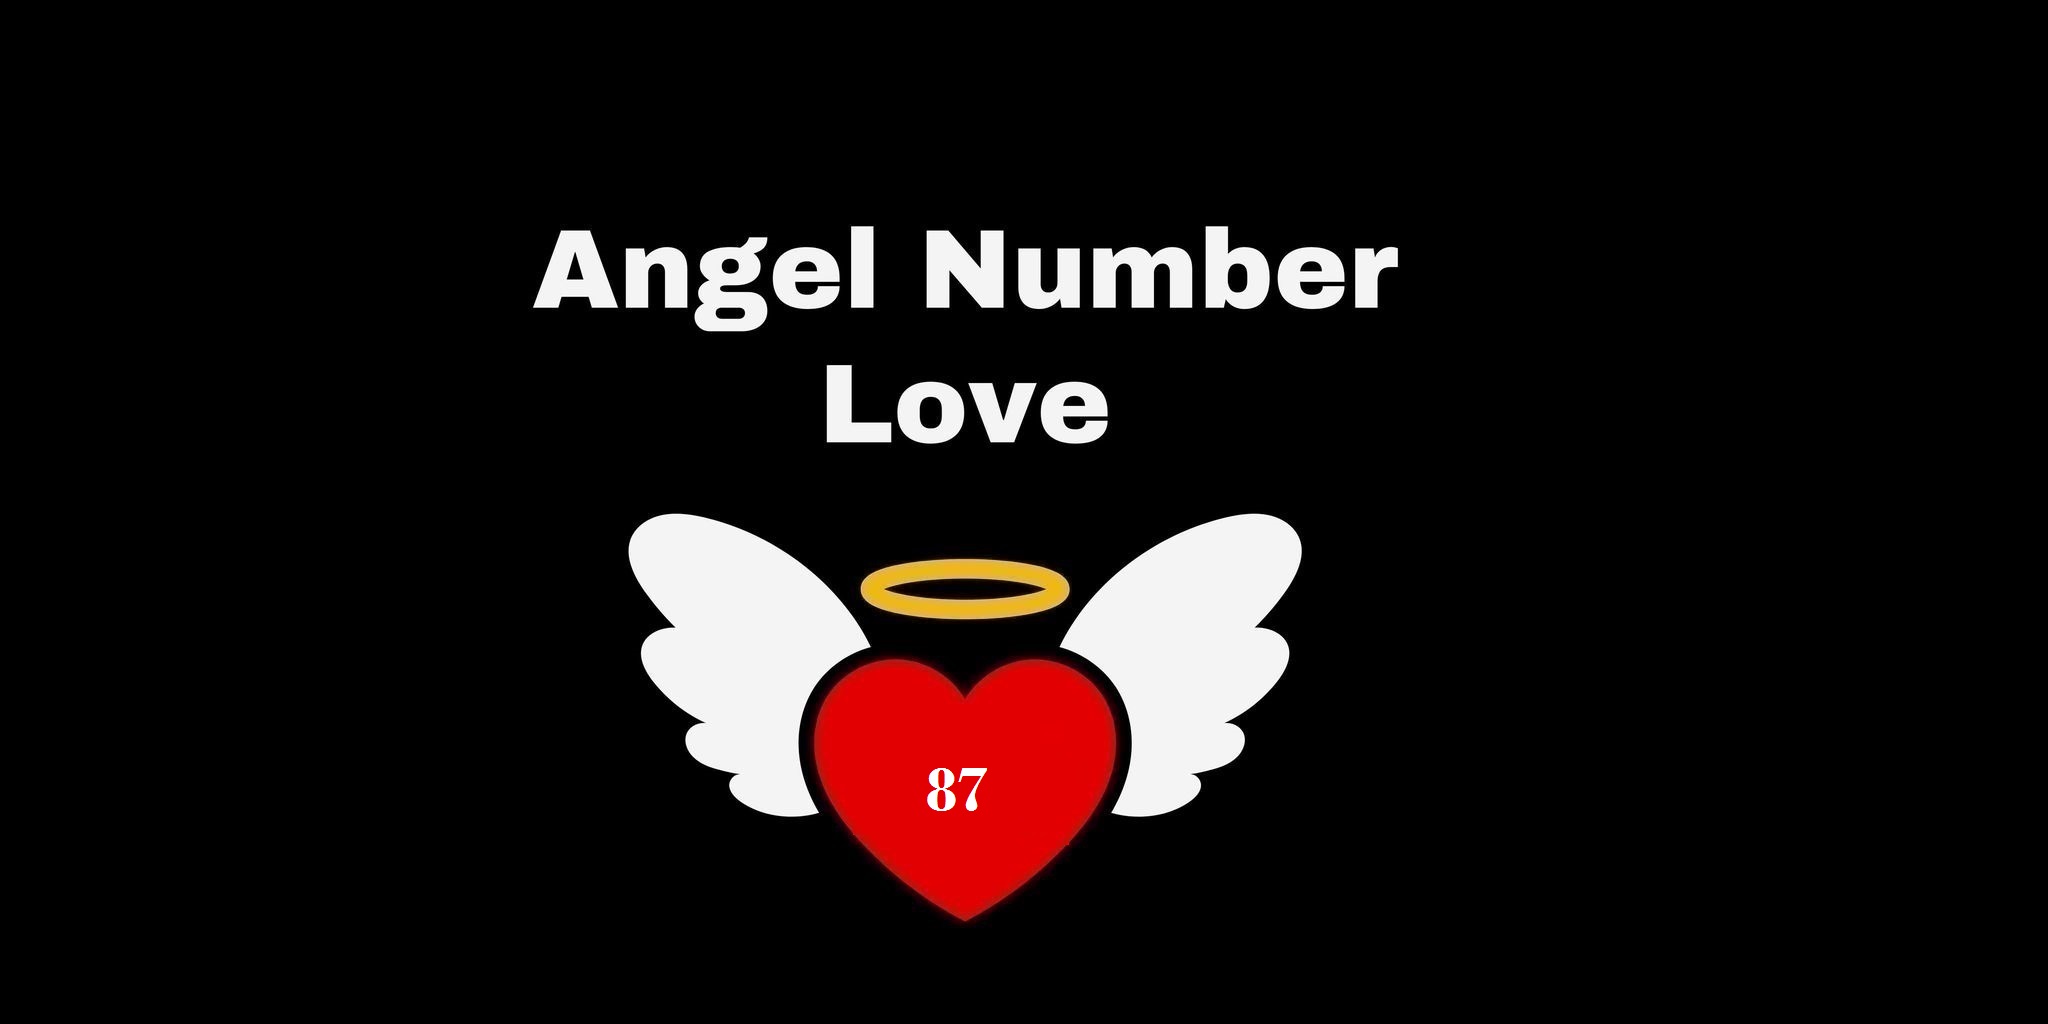 87 Angel Number Meaning In Love